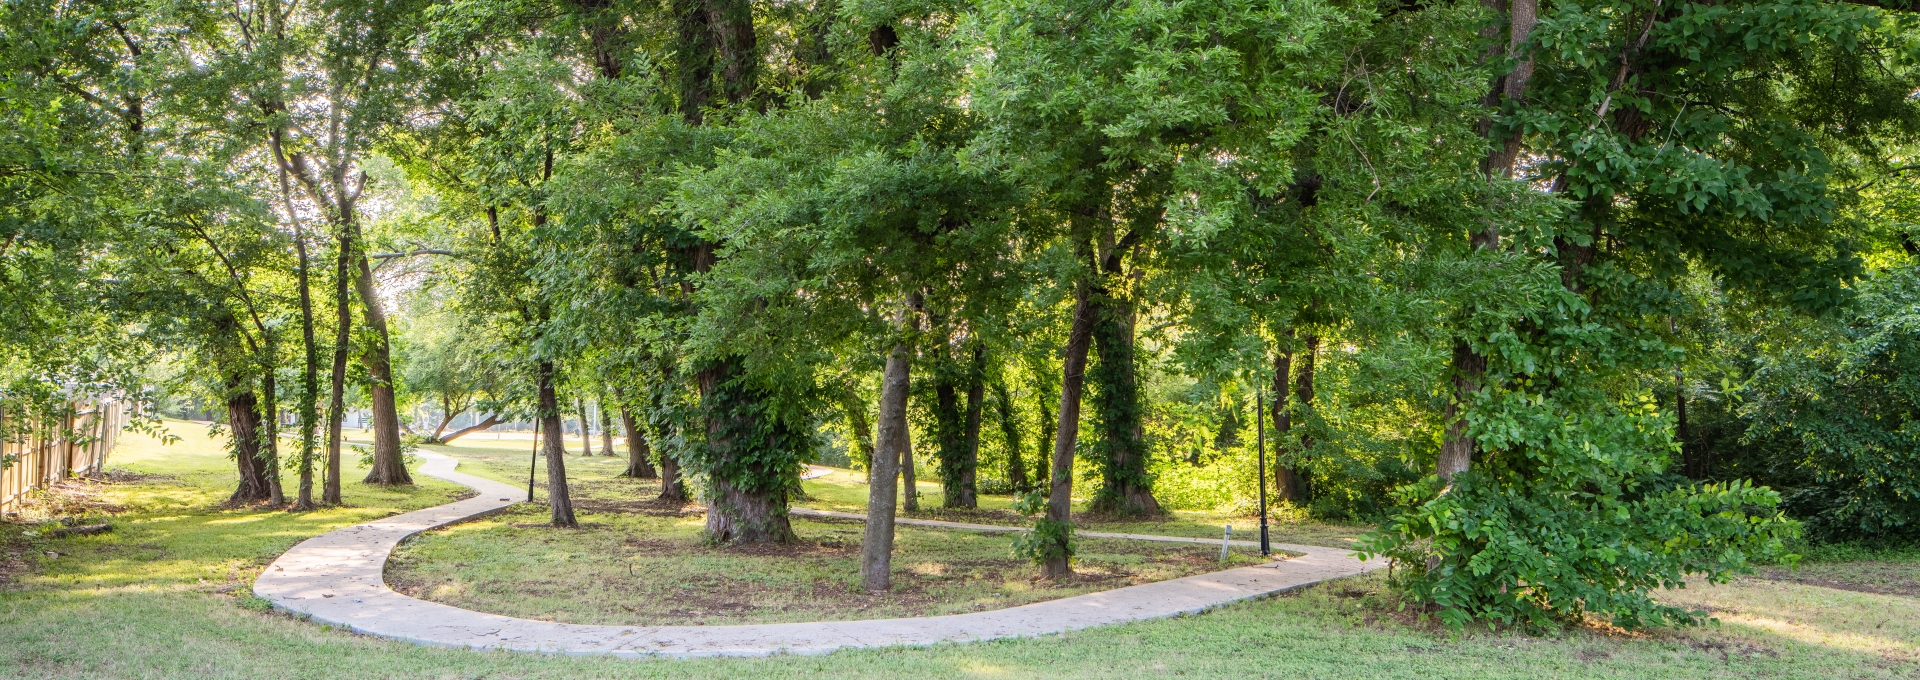 Photo of trees and walking path at Sunrise Creek Park